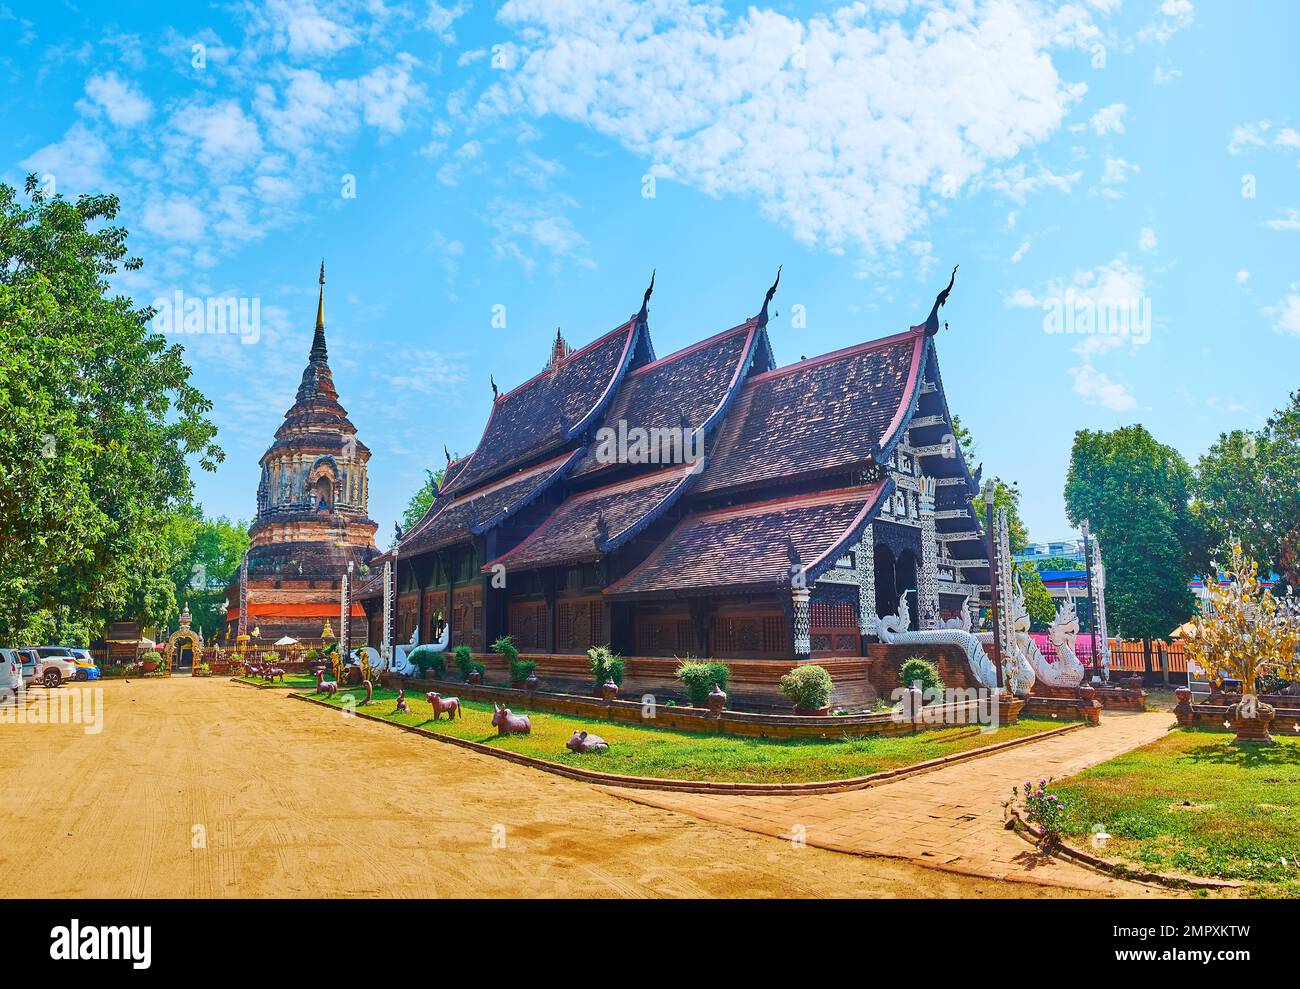 Panorama of the teakwood Viharn with pyathat roof and the ancient Lanna style Chedi in background, Wat Lok Moli, Chiang Mai, Thailand Stock Photo